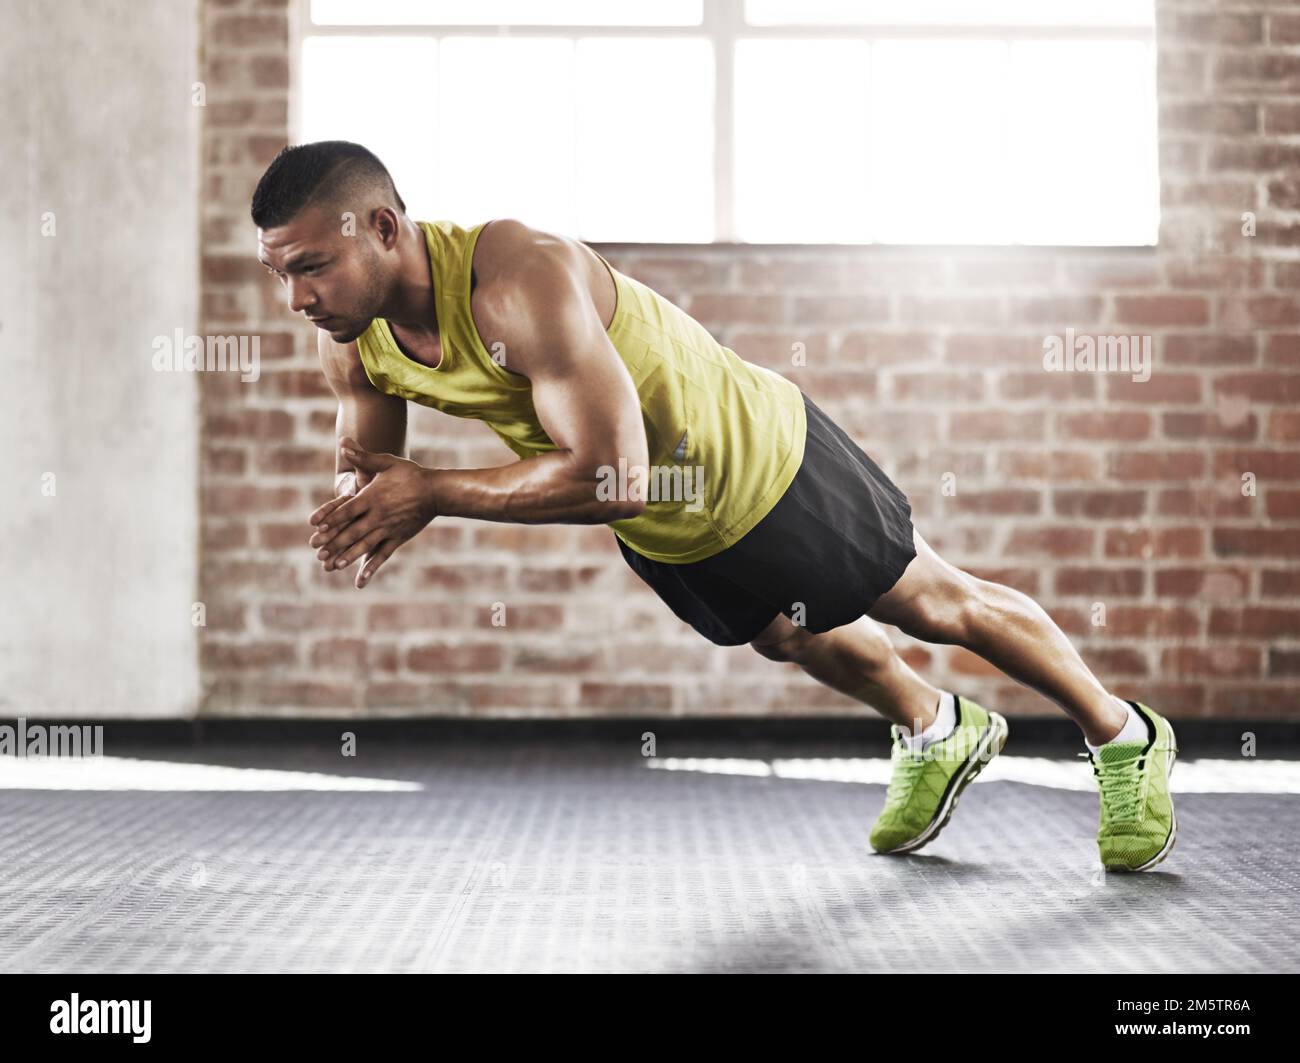 The front clap pushup. Full length shot of a young man working out in the gym. Stock Photo